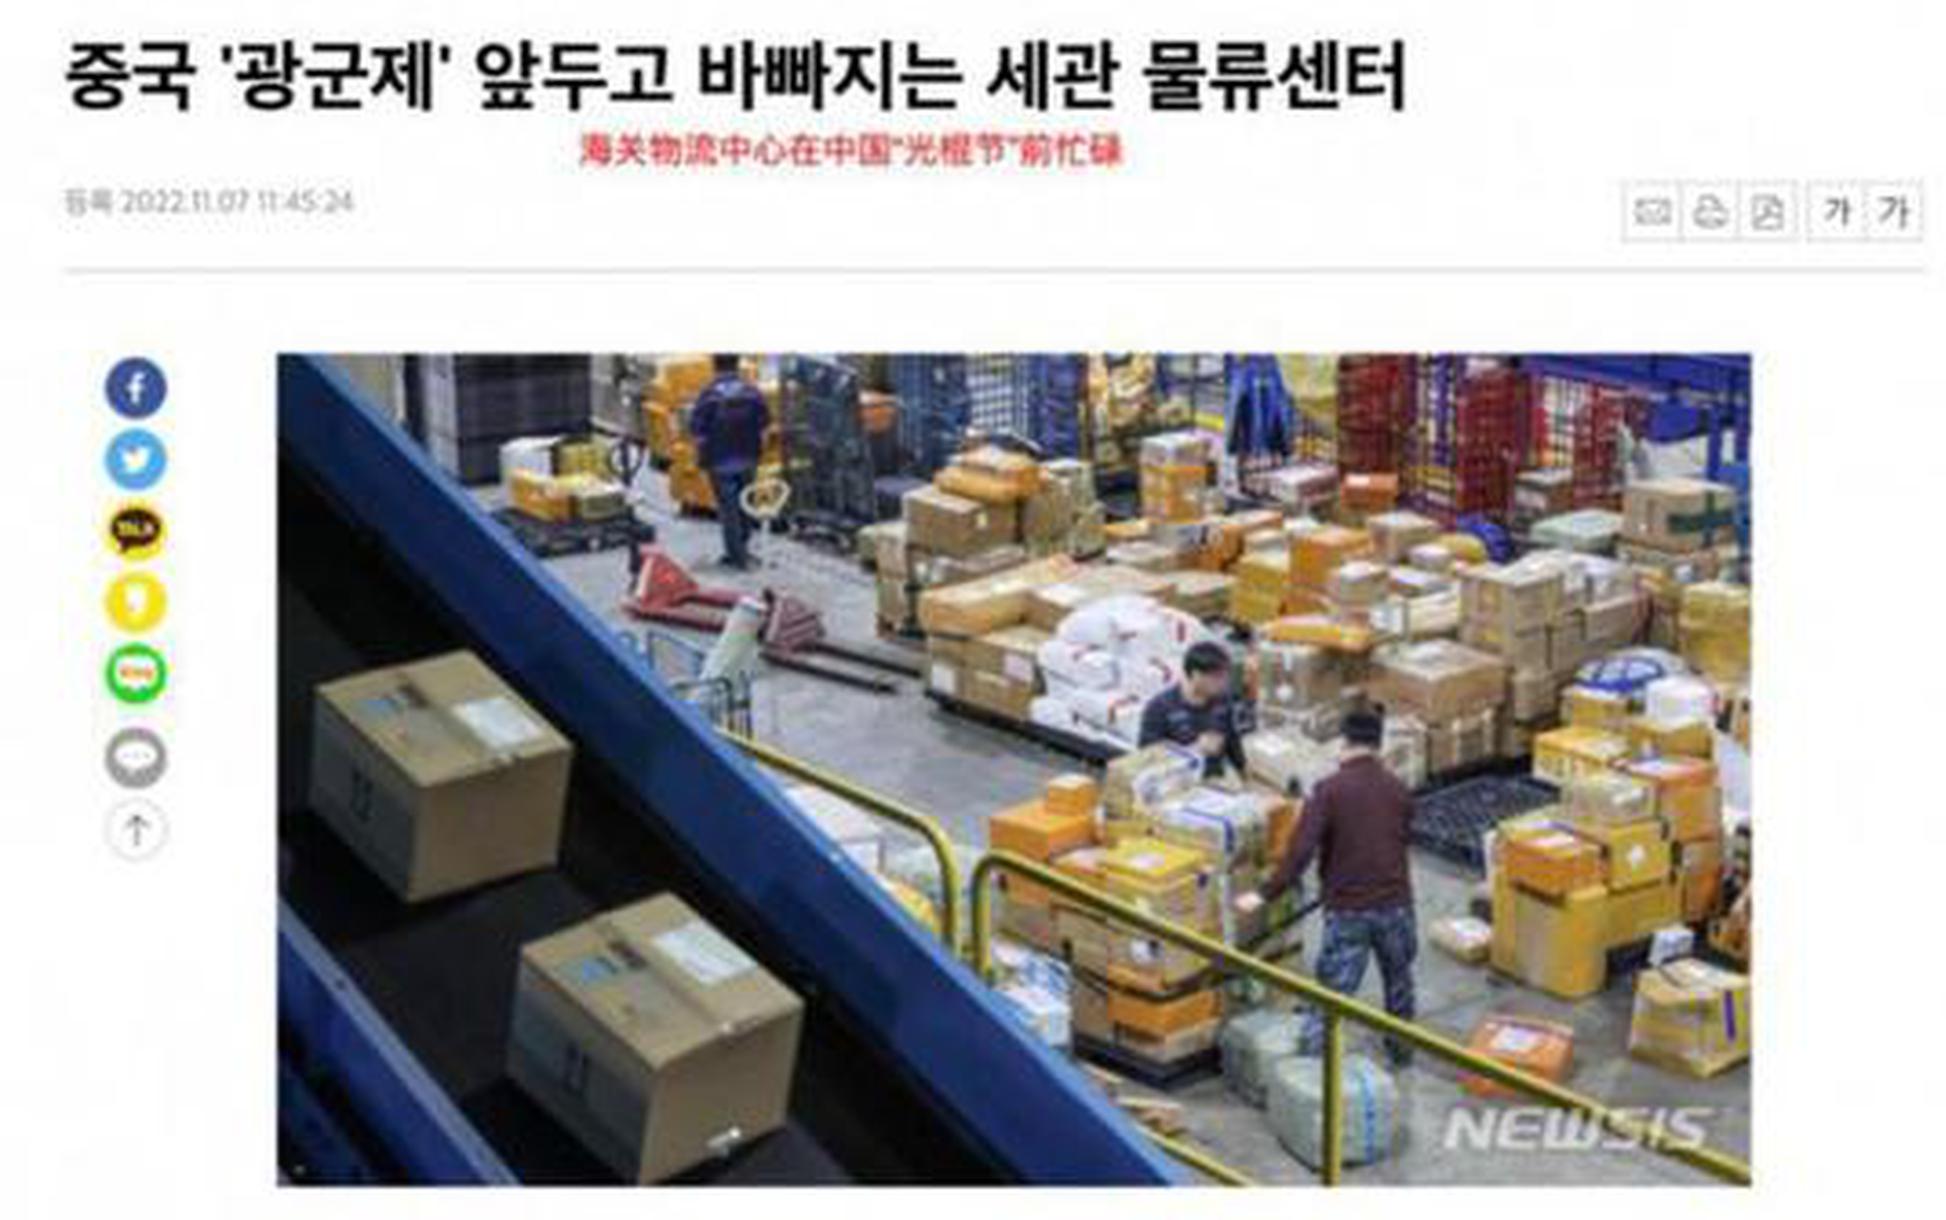 Chinese commodities on e-commerce platforms popular in S Korea 